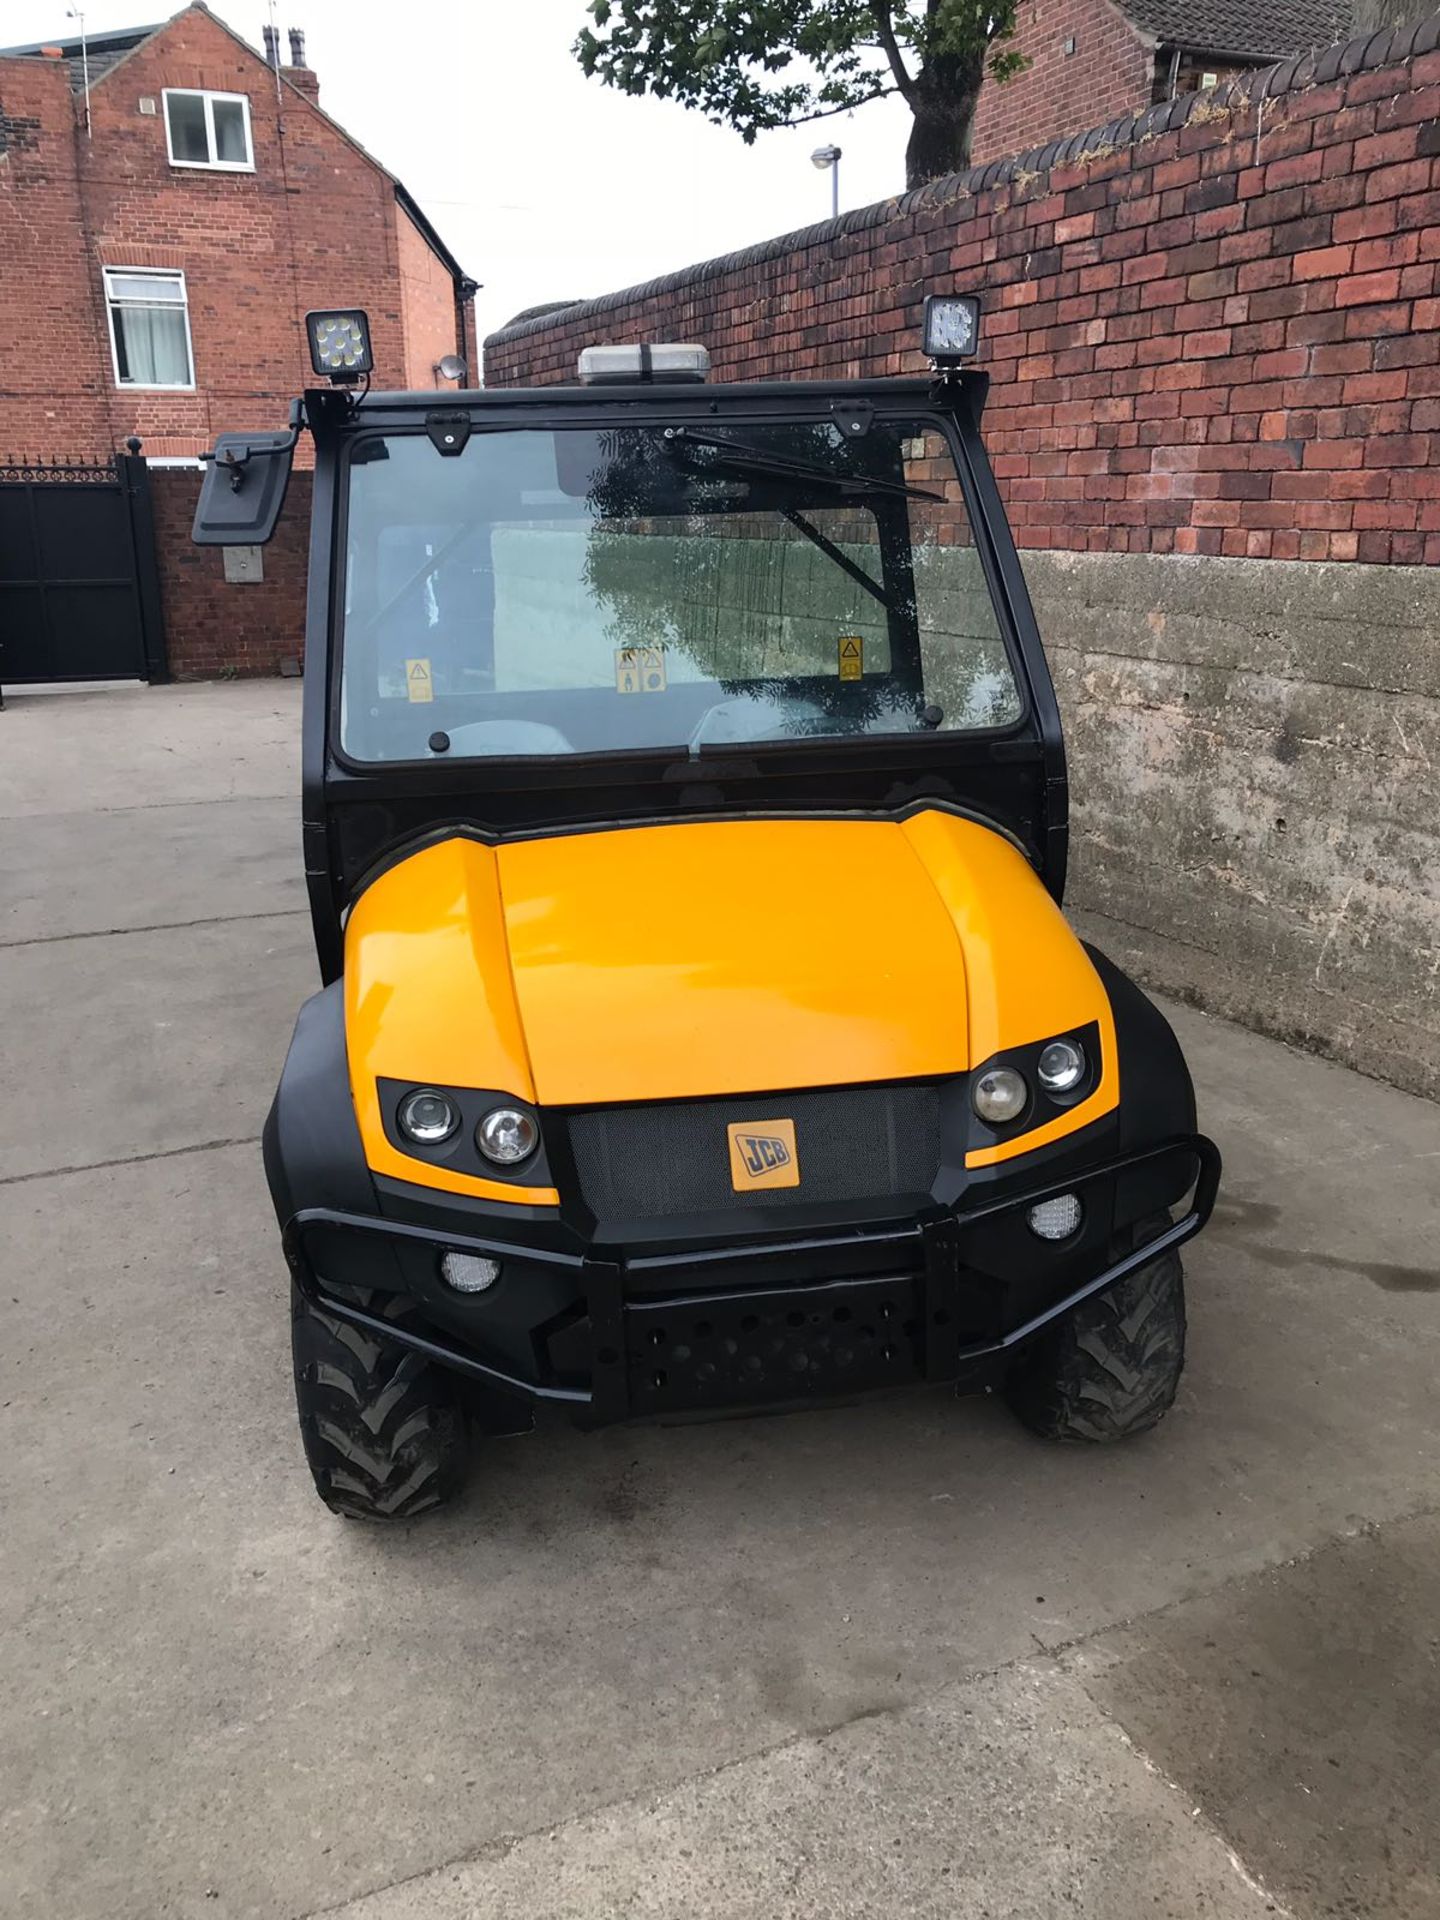 2013/62 REG JCB WORKMAX 1000D UTILITY VEHICLE - SHOWING 0 FORMER KEEPERS *PLUS VAT* - Image 2 of 6